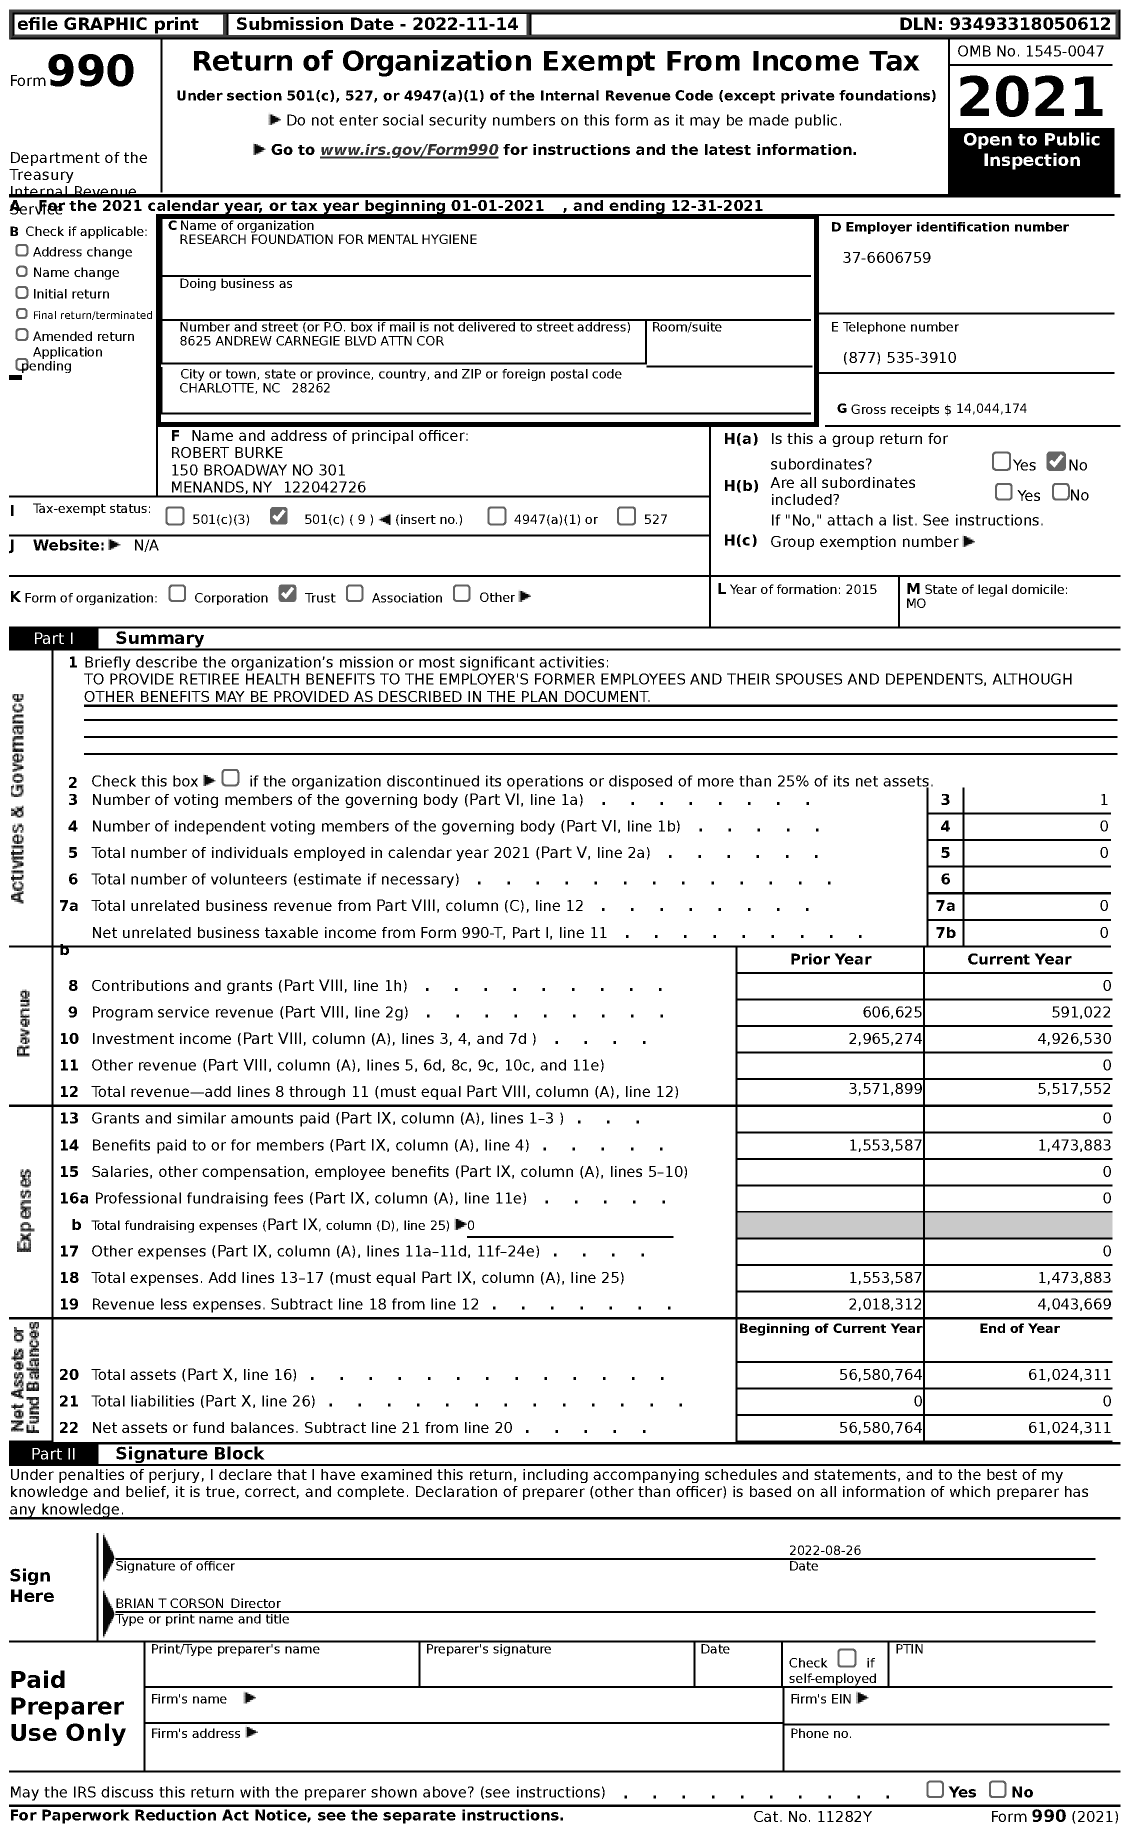 Image of first page of 2021 Form 990 for Research Foundation for Mental Hygiene / Tiaa-Cref TR Company FSB Ttee